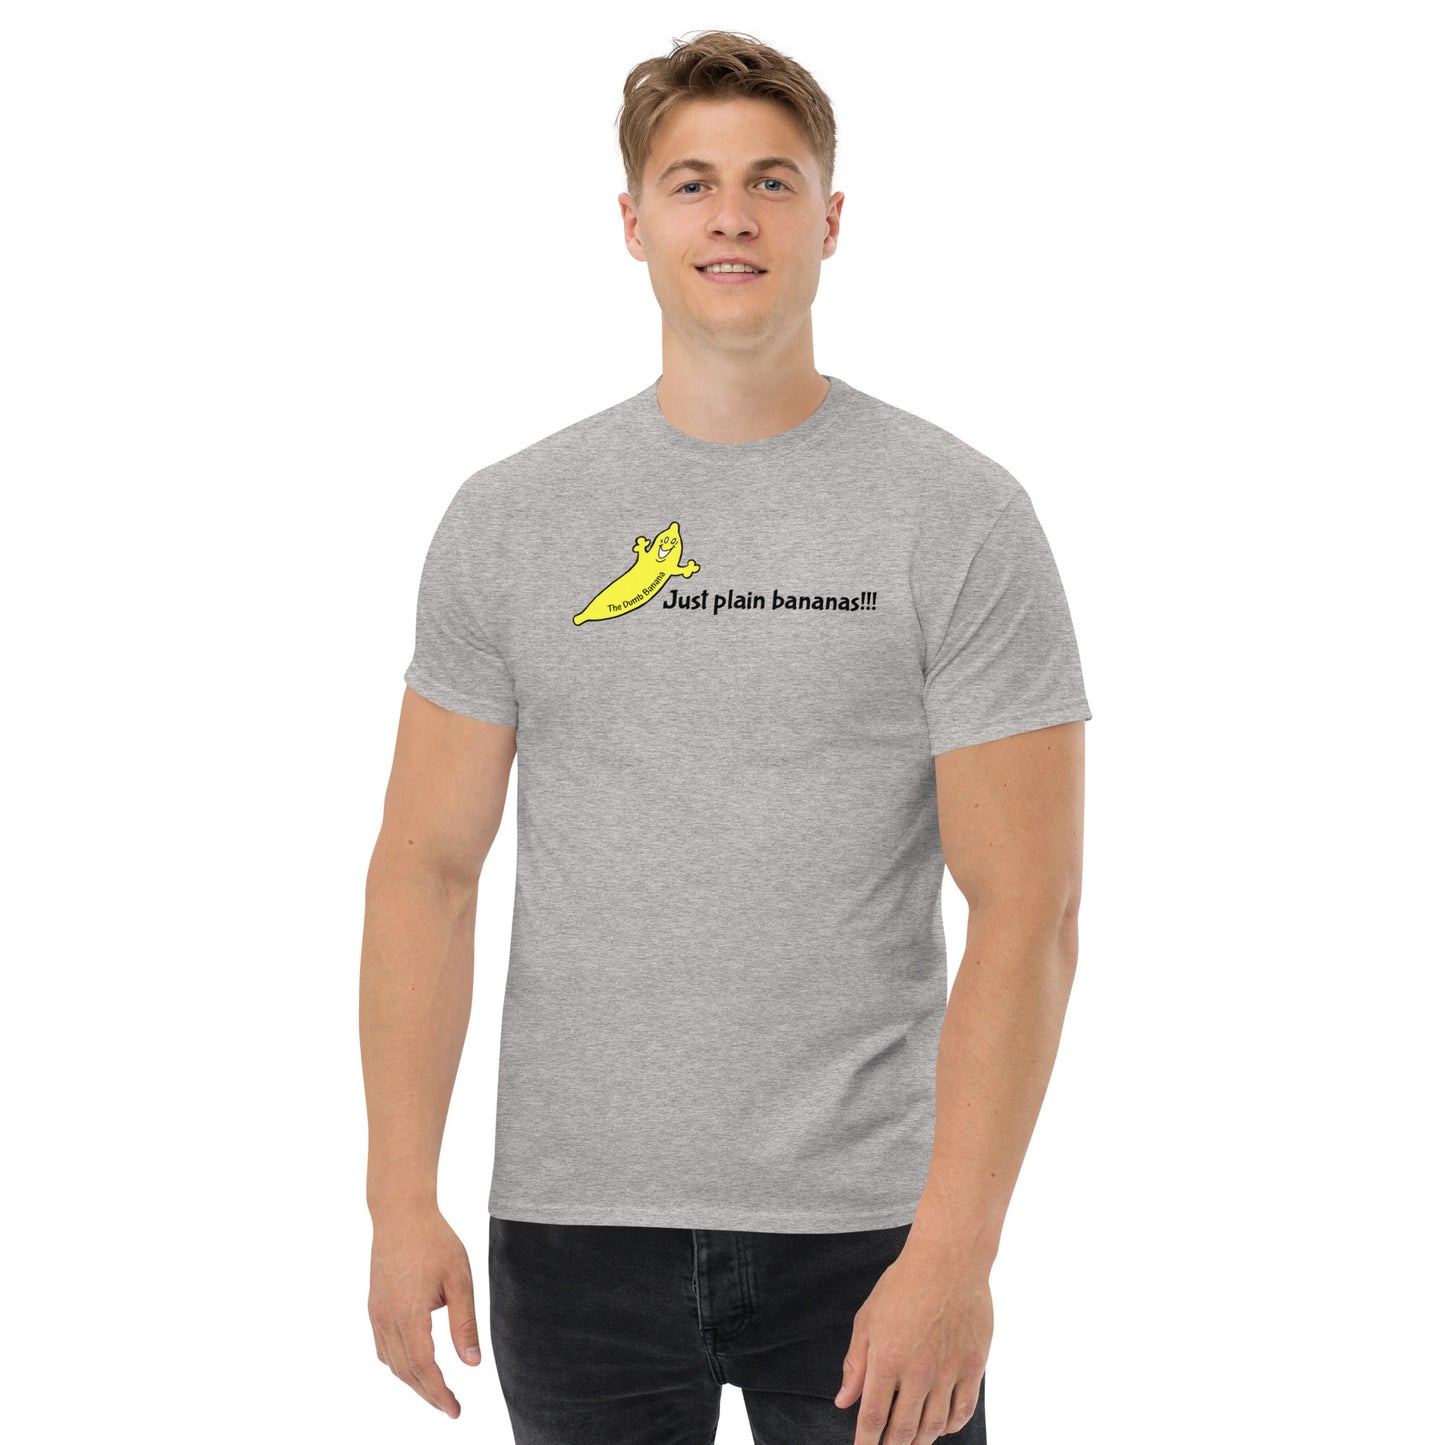 JUST PLAIN BANANAS!!! Men's Classic Tee - The shirt that all bananas are "going bananas" for!!!